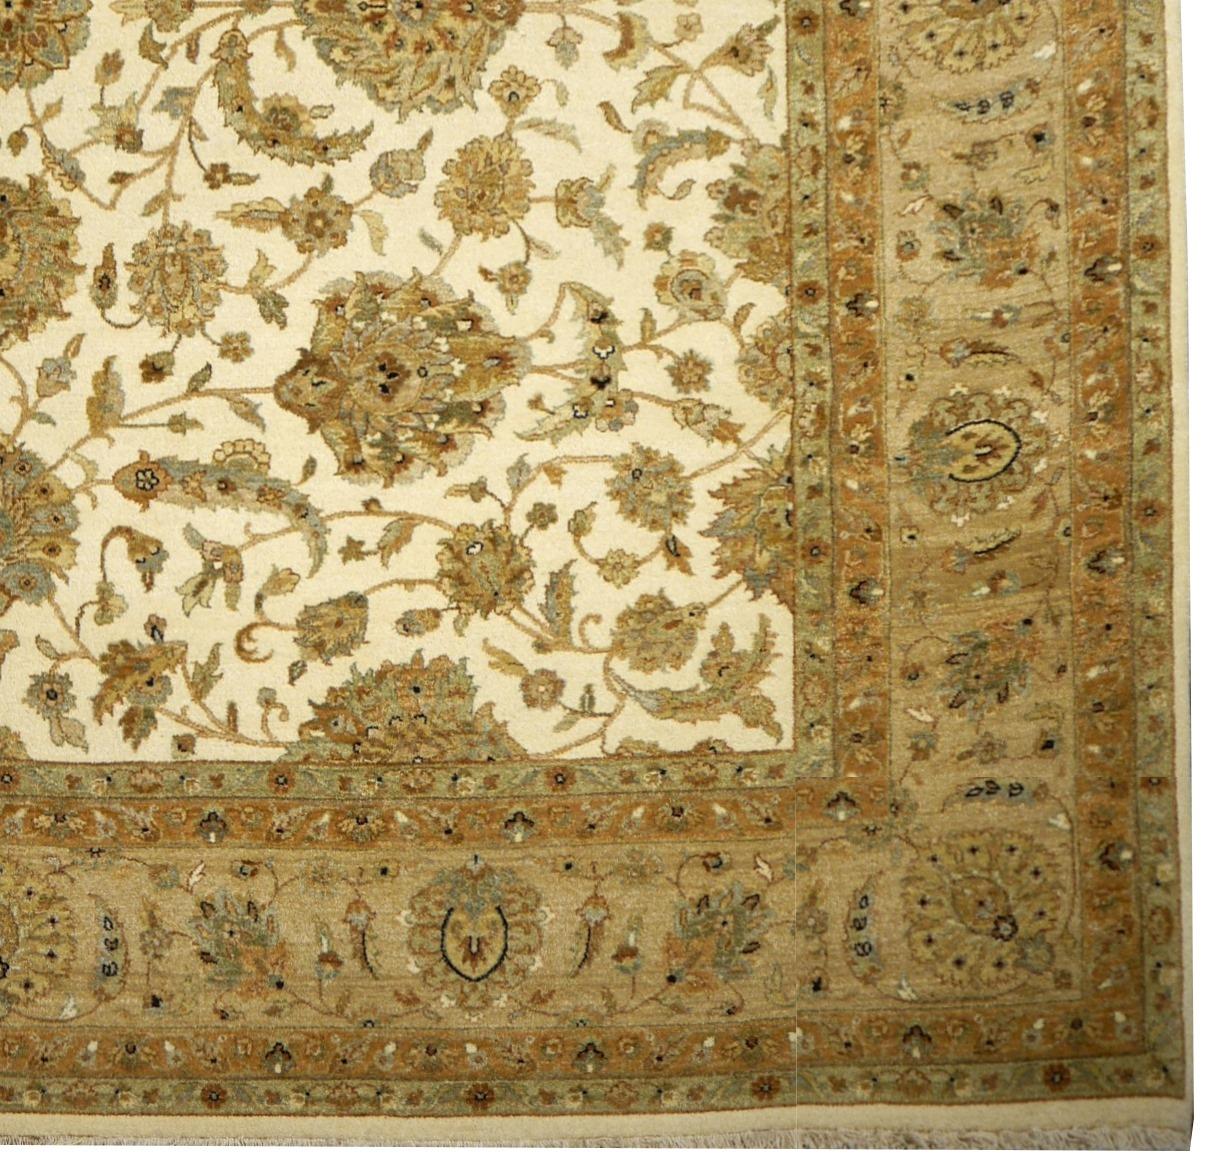 Square Ziegler Mahal Design Rug Wool Pile Beige Green from India 8